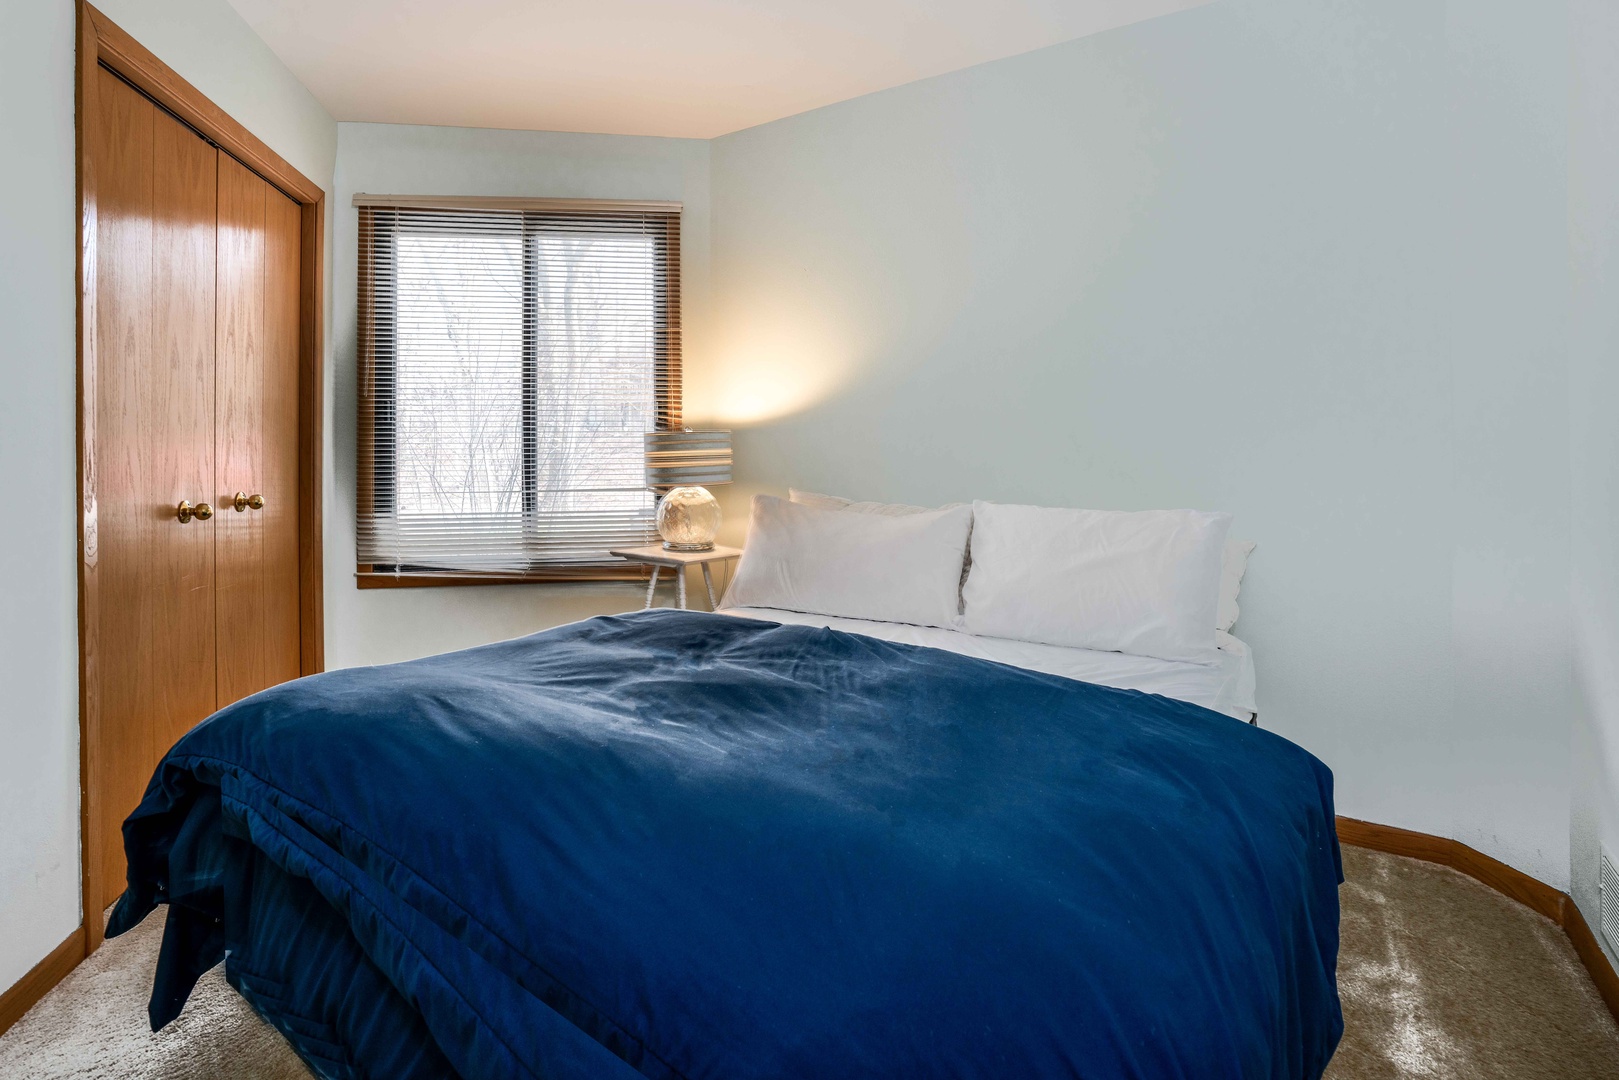 Unwind in the second bedroom furnished with queen bed & closet